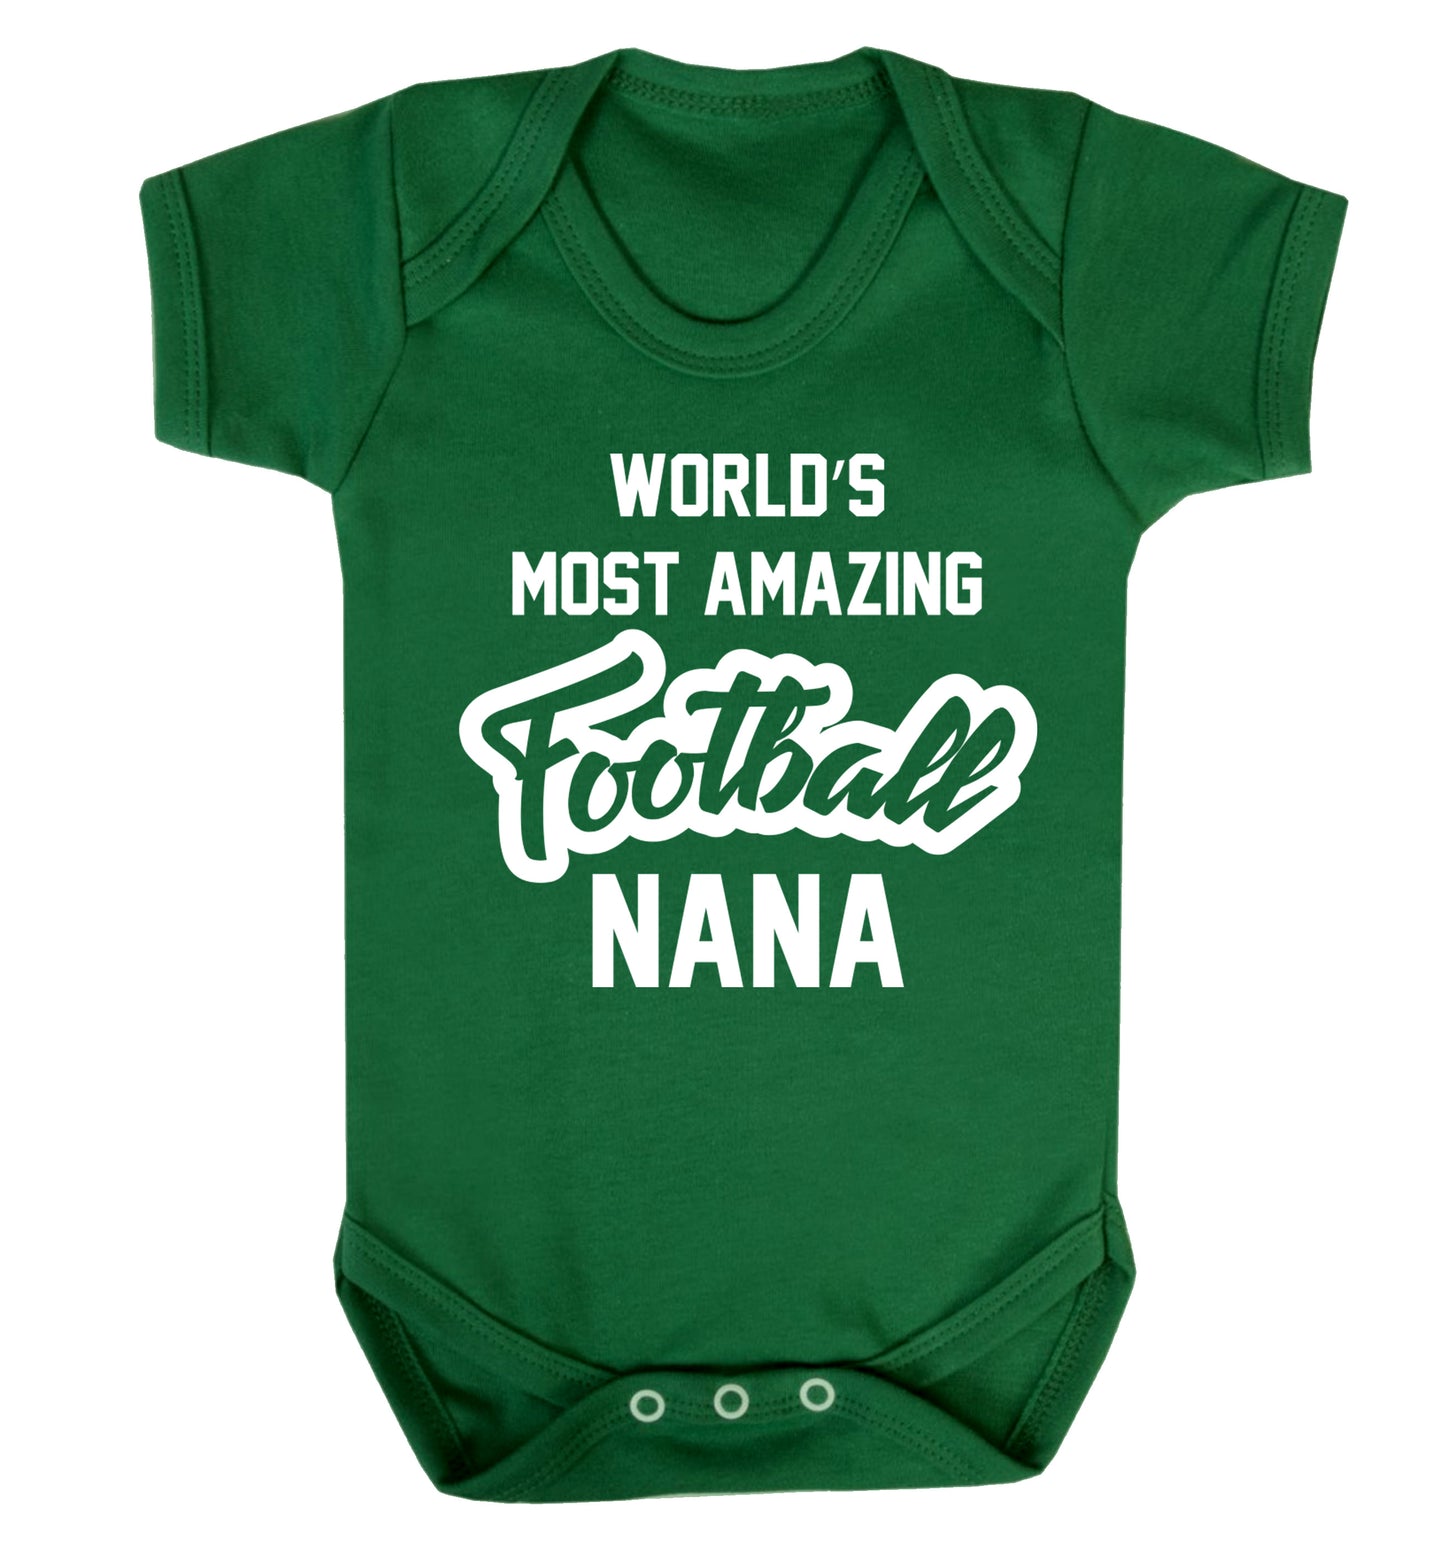 Worlds most amazing football nana Baby Vest green 18-24 months